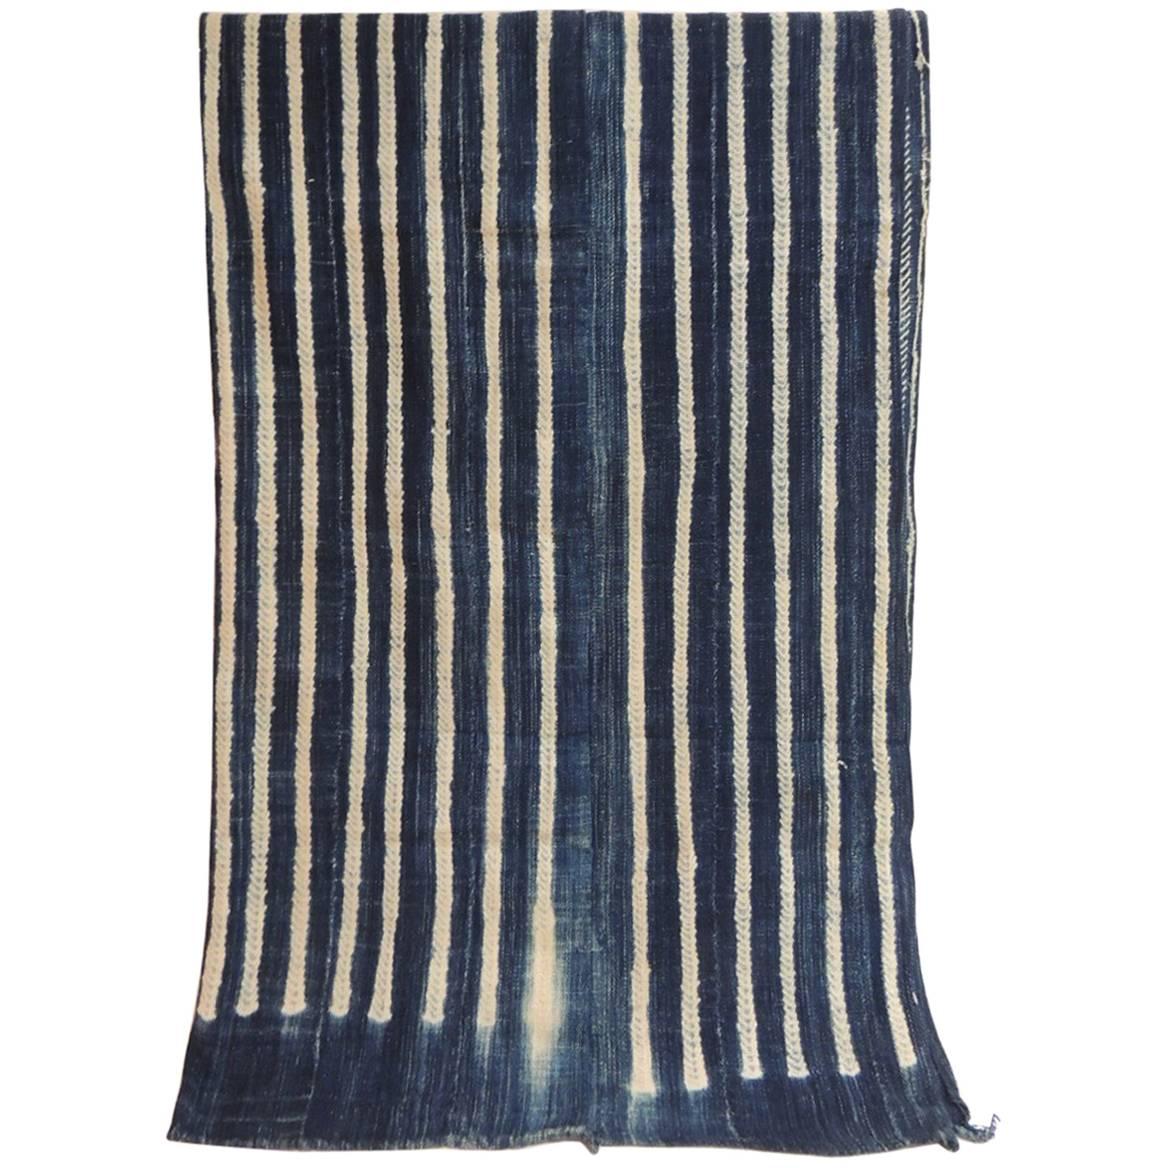 Vintage Yoruba and Baulé Warp Ikat Artisanal cloth. West Africa vintage Yoruba and Baulé warp ikat.
Ikat is the process whereby threads are tie-dyed before weaving takes place. When the cloth is woven, any section of the cloth where the threads